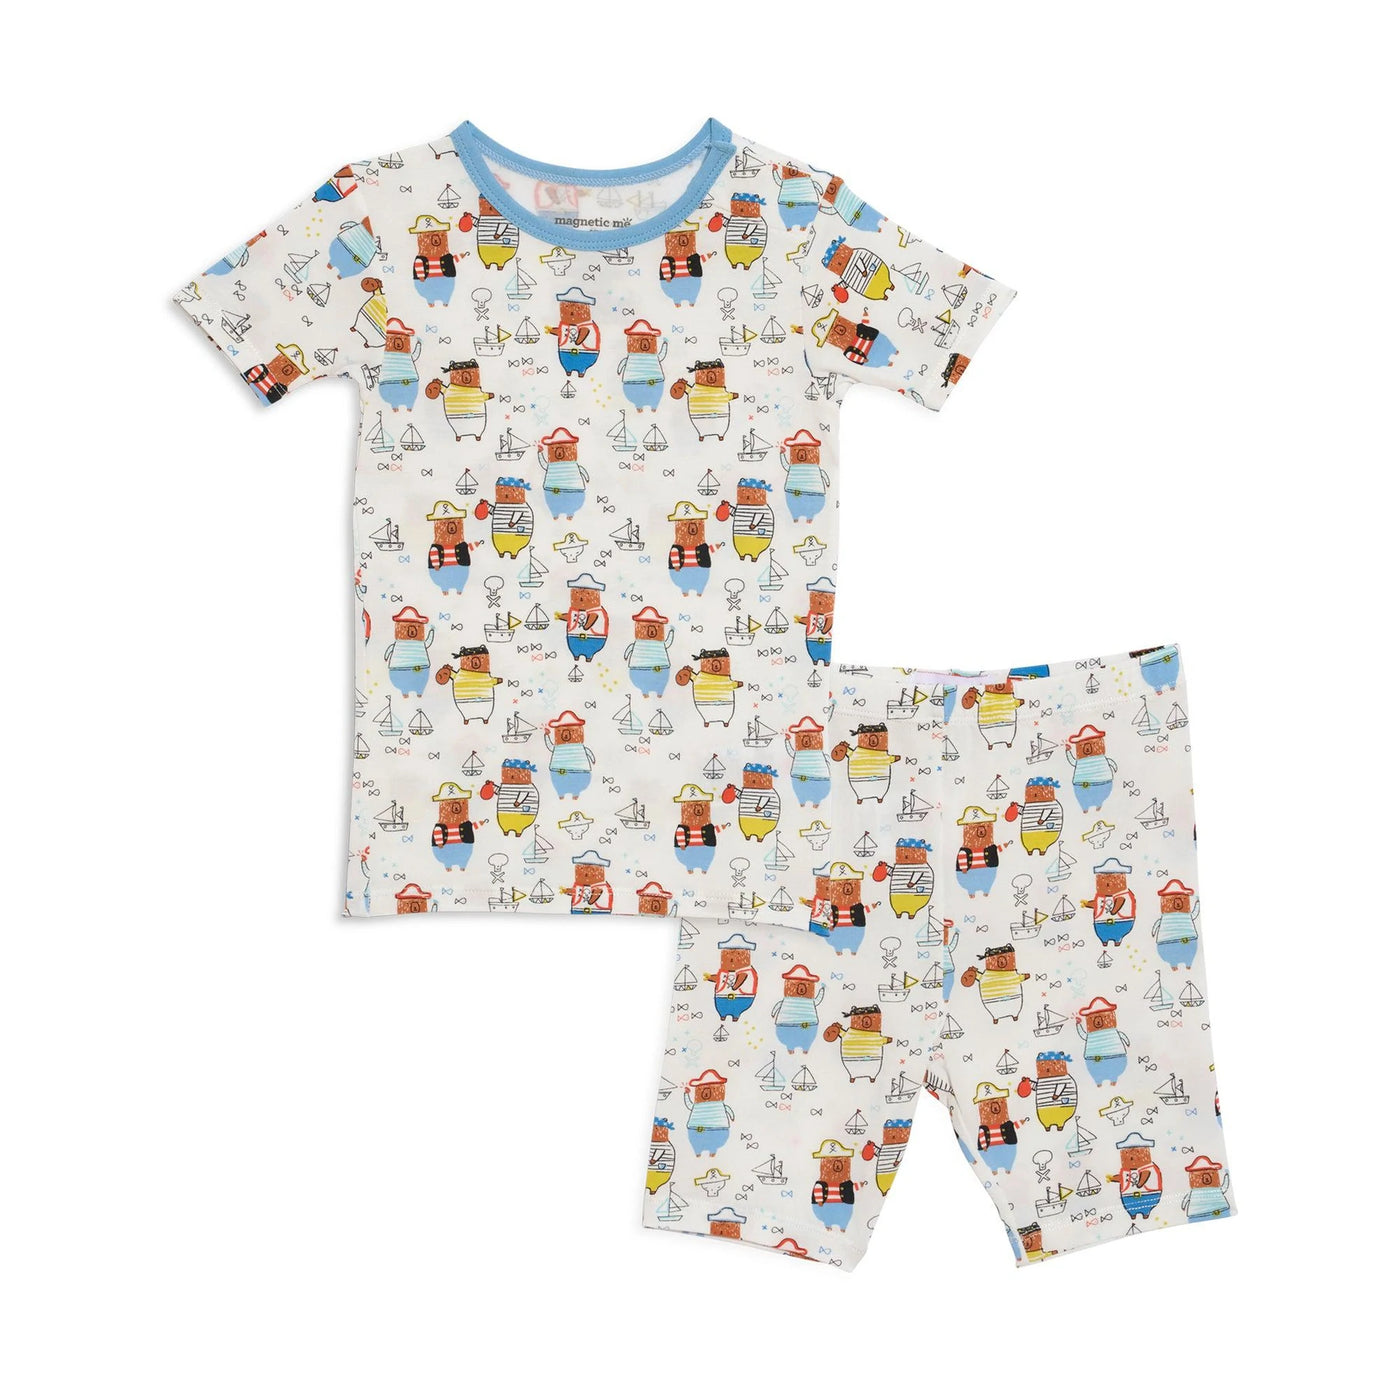 Pirates Looty Modal Magnetic 2pc Toddler PJ's